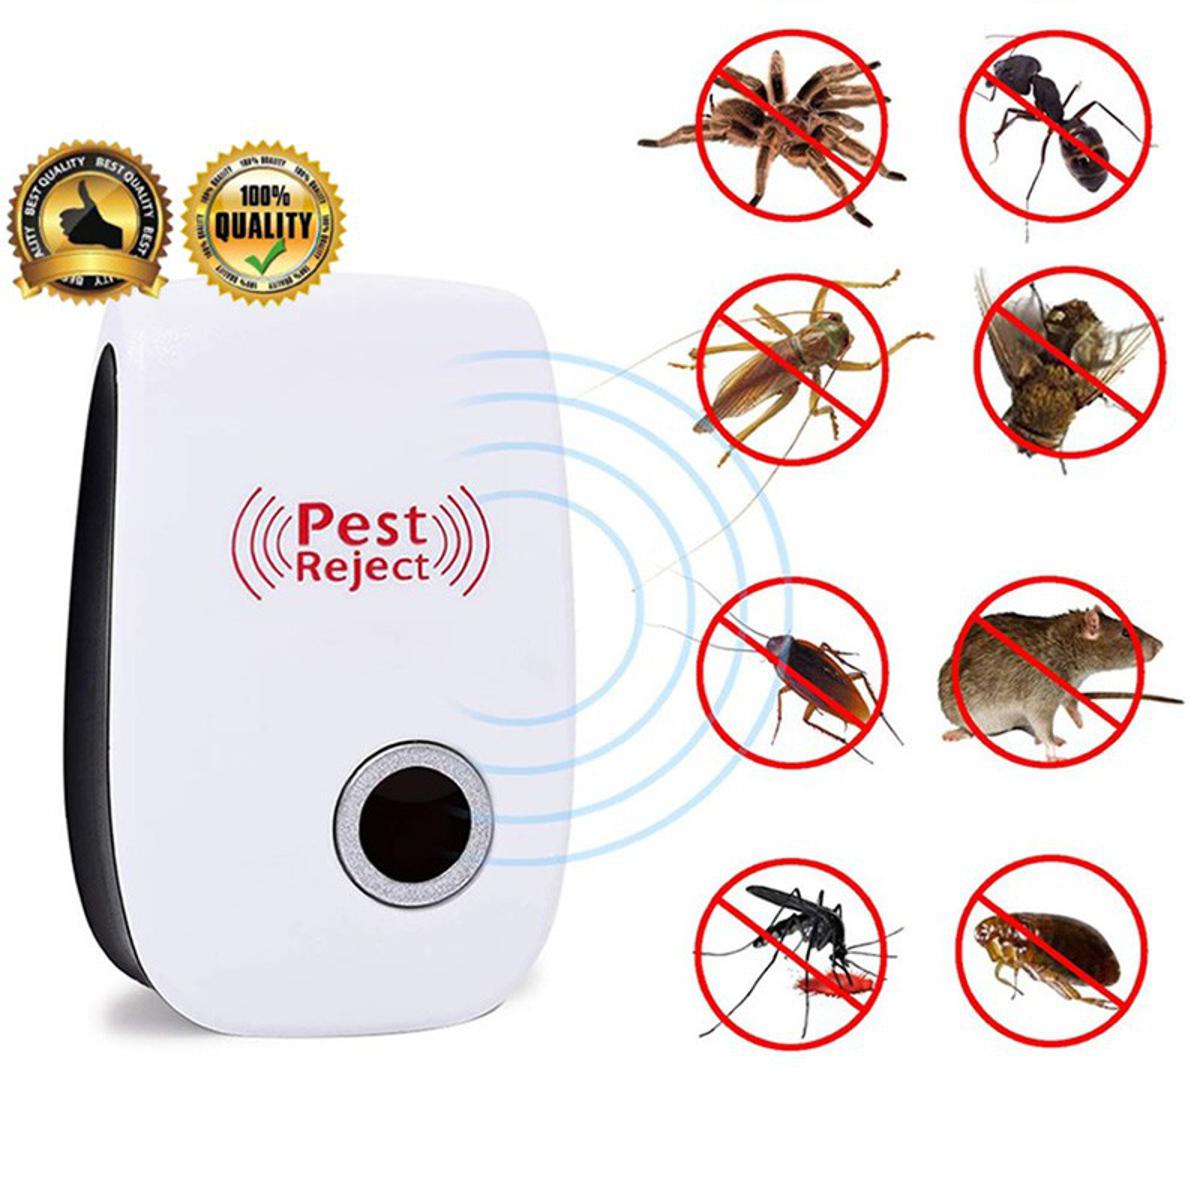 Pest Reject Pest Reject Pro Ultrasonic Animal Repellent Insect